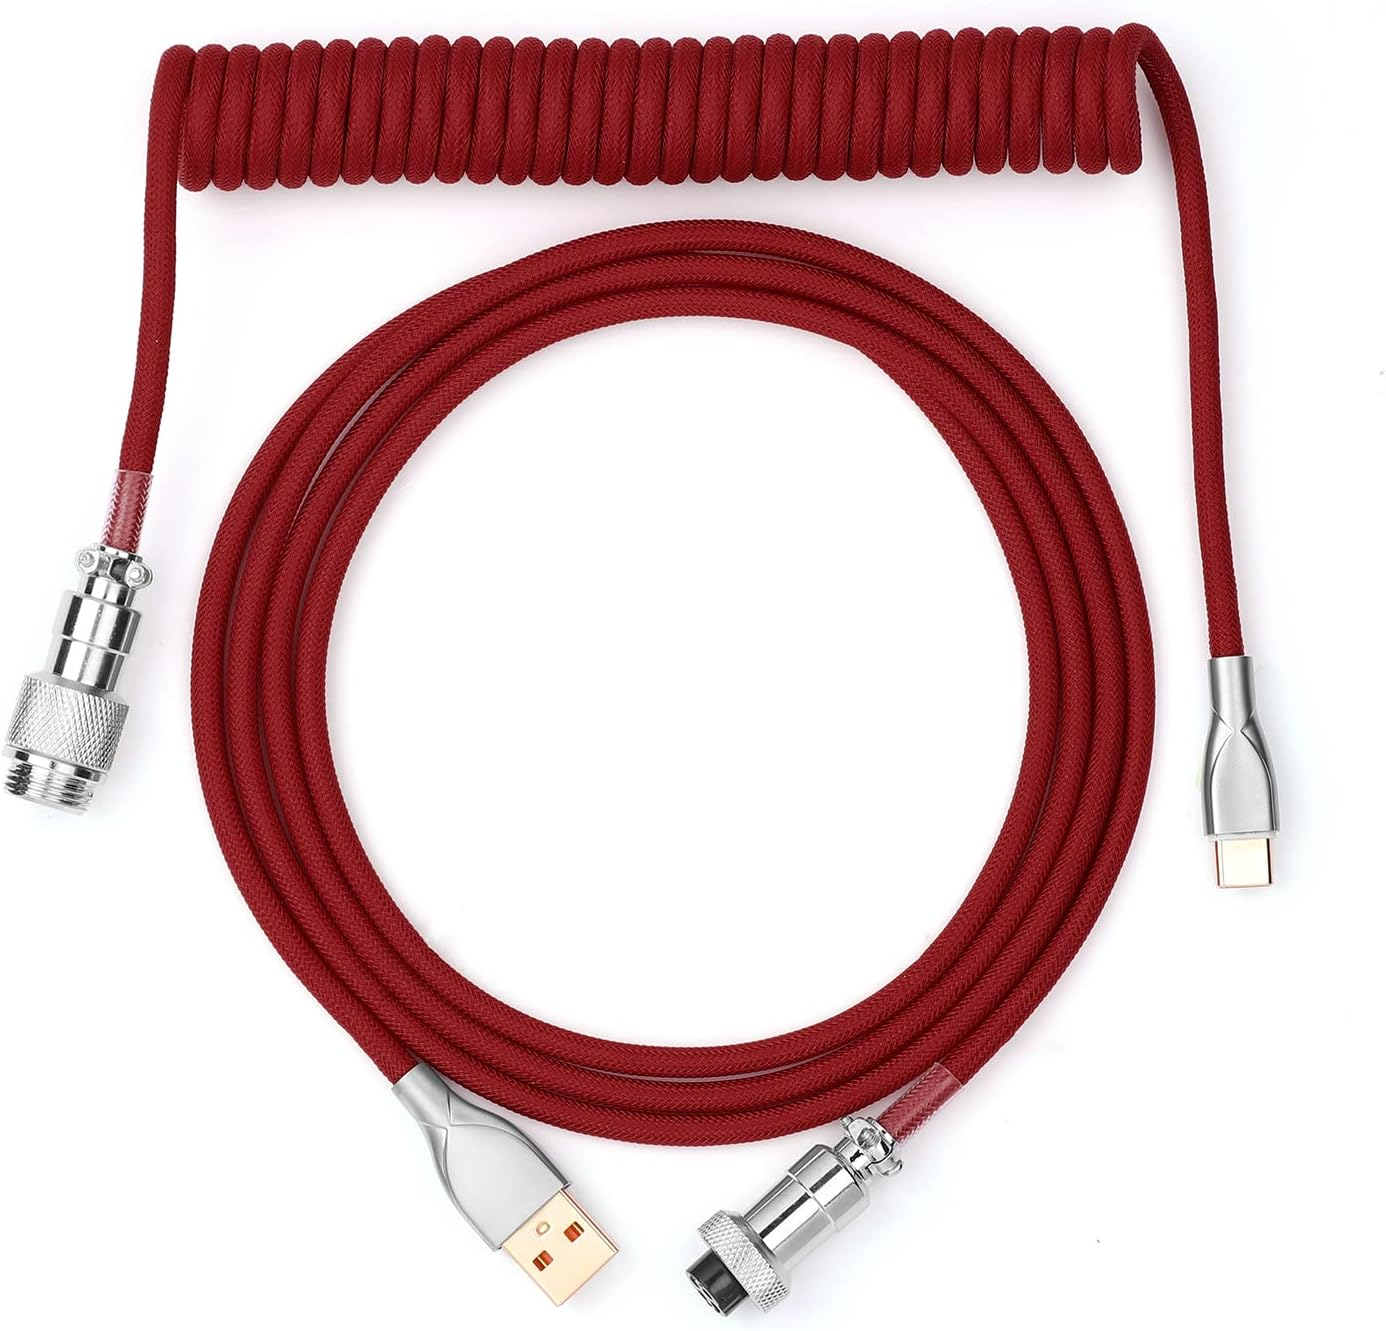 Coiled Cable for Mechanical keyboards